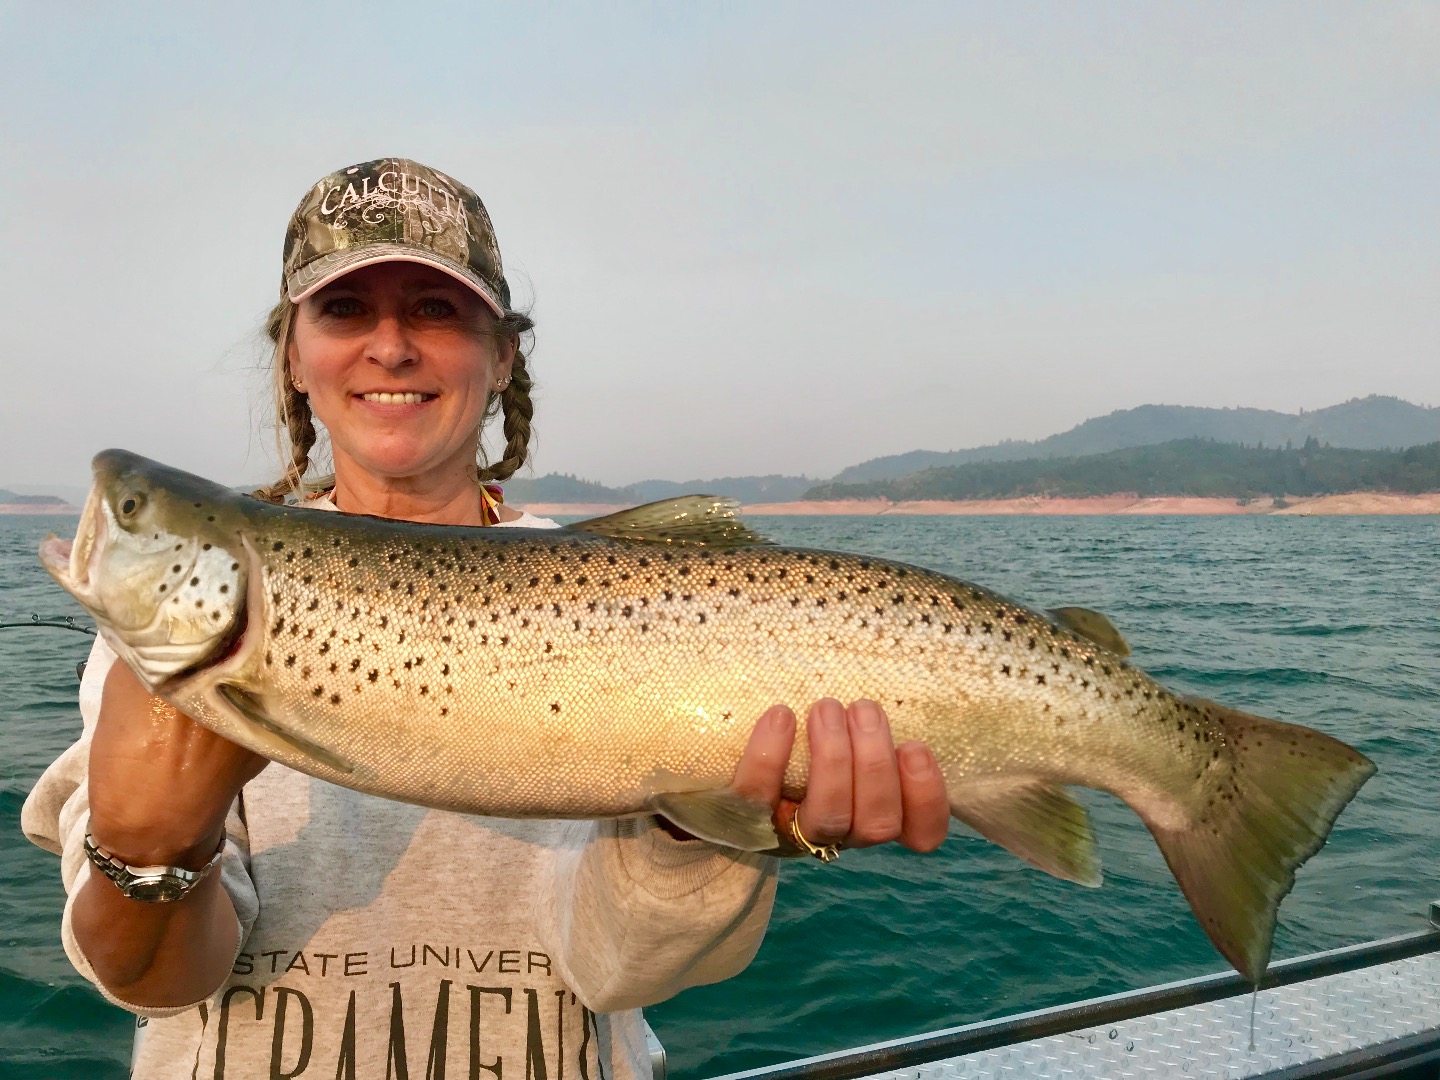 Shasta Lake continues to produce some quality trout!